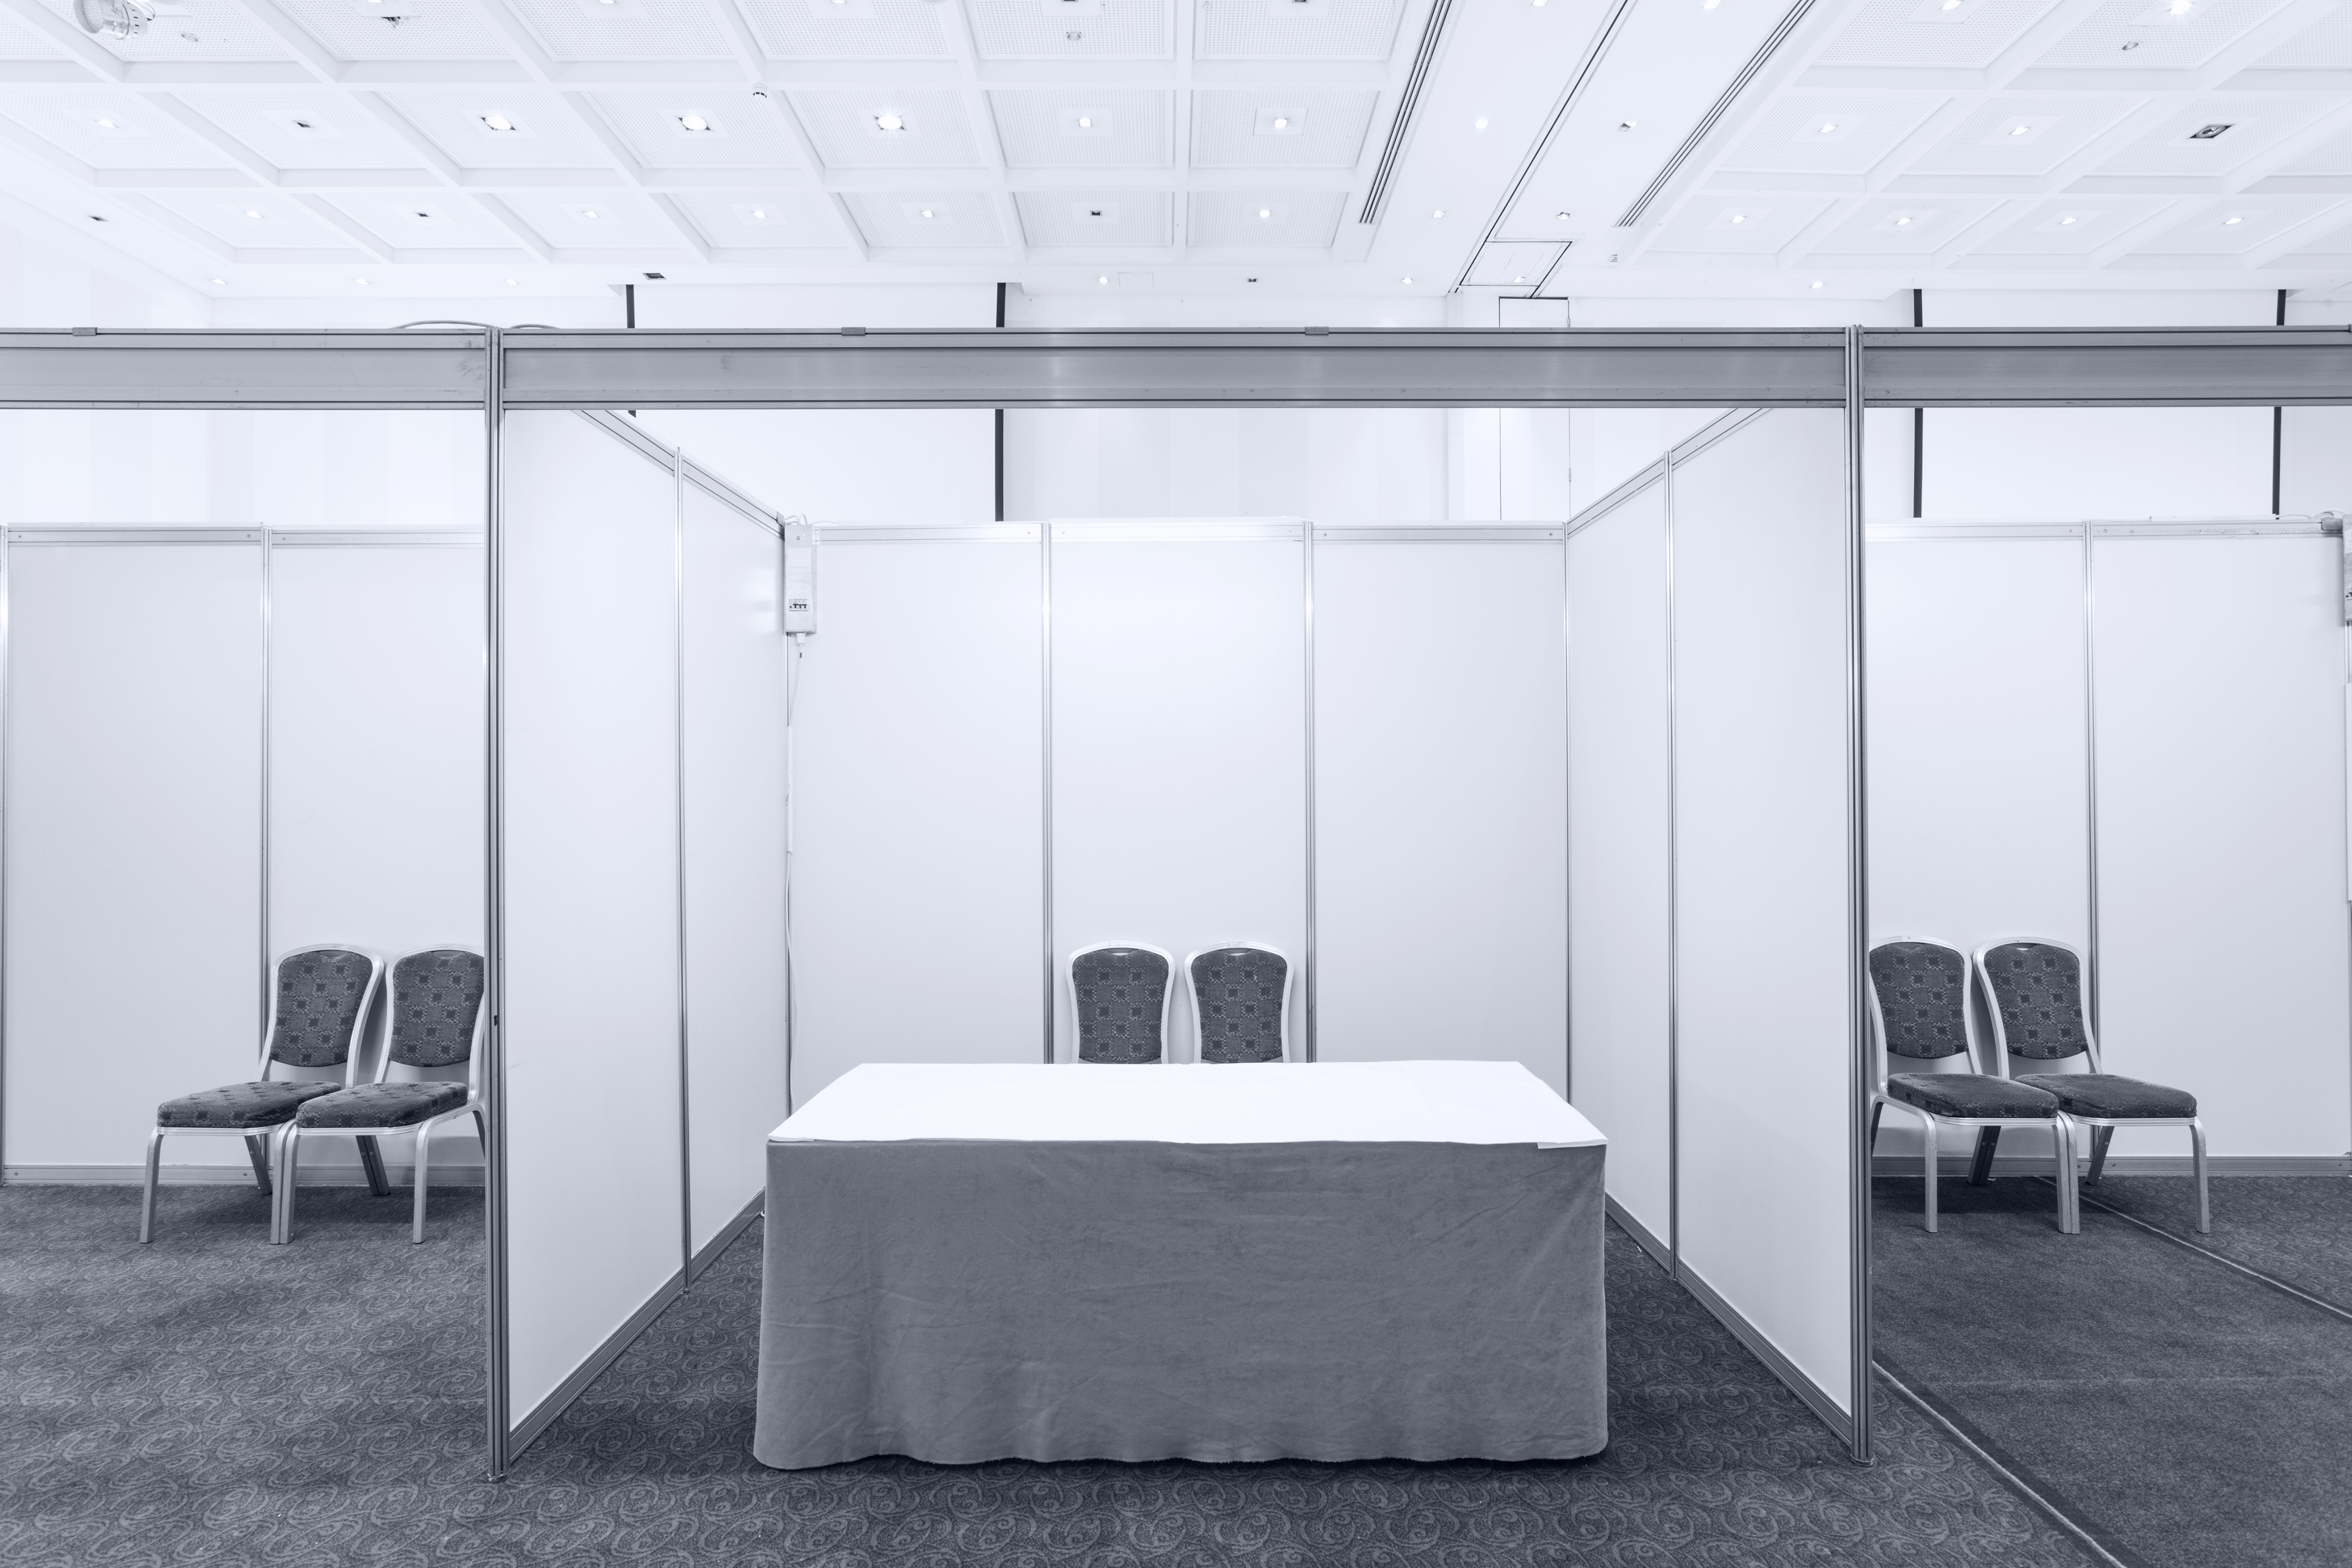 Empty Tradeshow Booth - Social Media is your virtual tradeshow booth